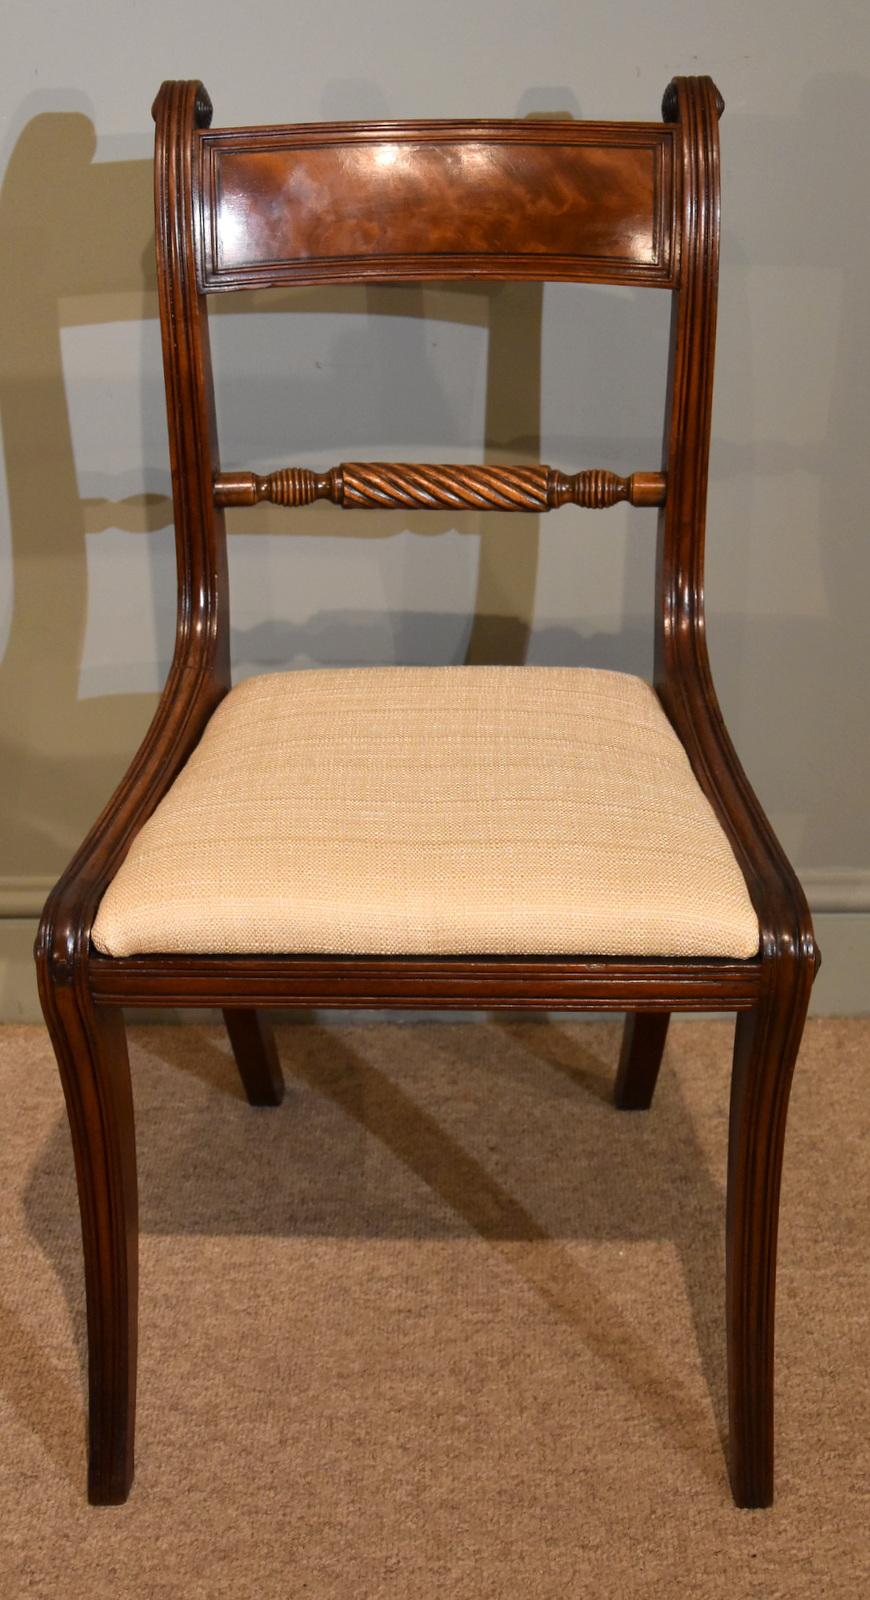 A very attractive set of ten harlequin Regency period mahogany rope back dining chairs, very similar

Dimensions single chair
Height 33.5